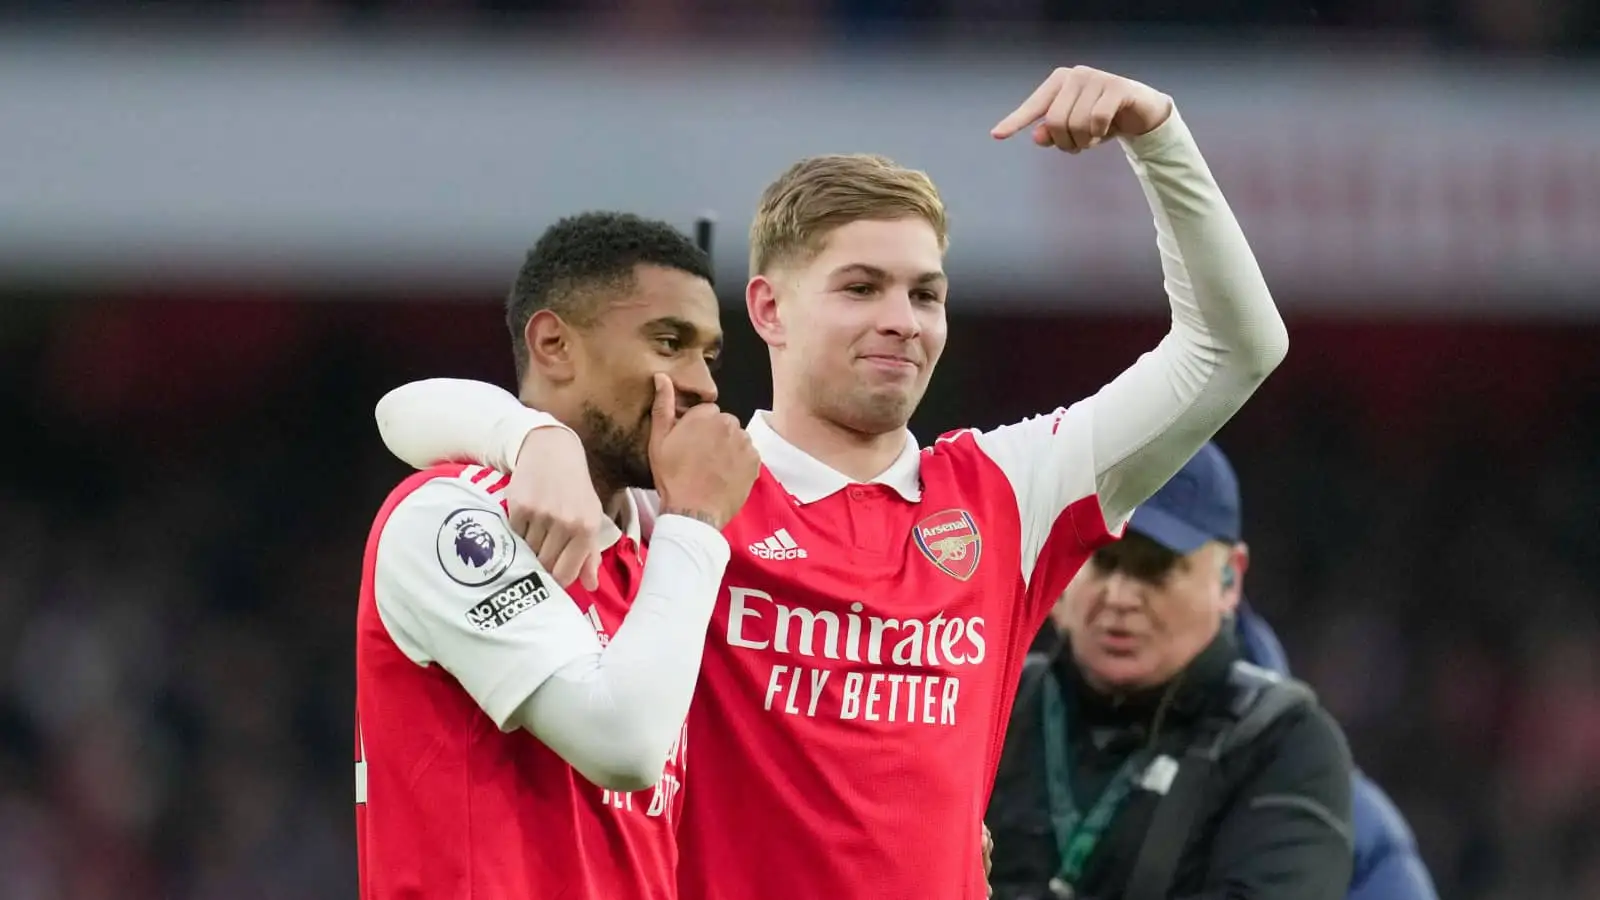 Arsenal stars Reiss Nelson and Emile Smith Rowe